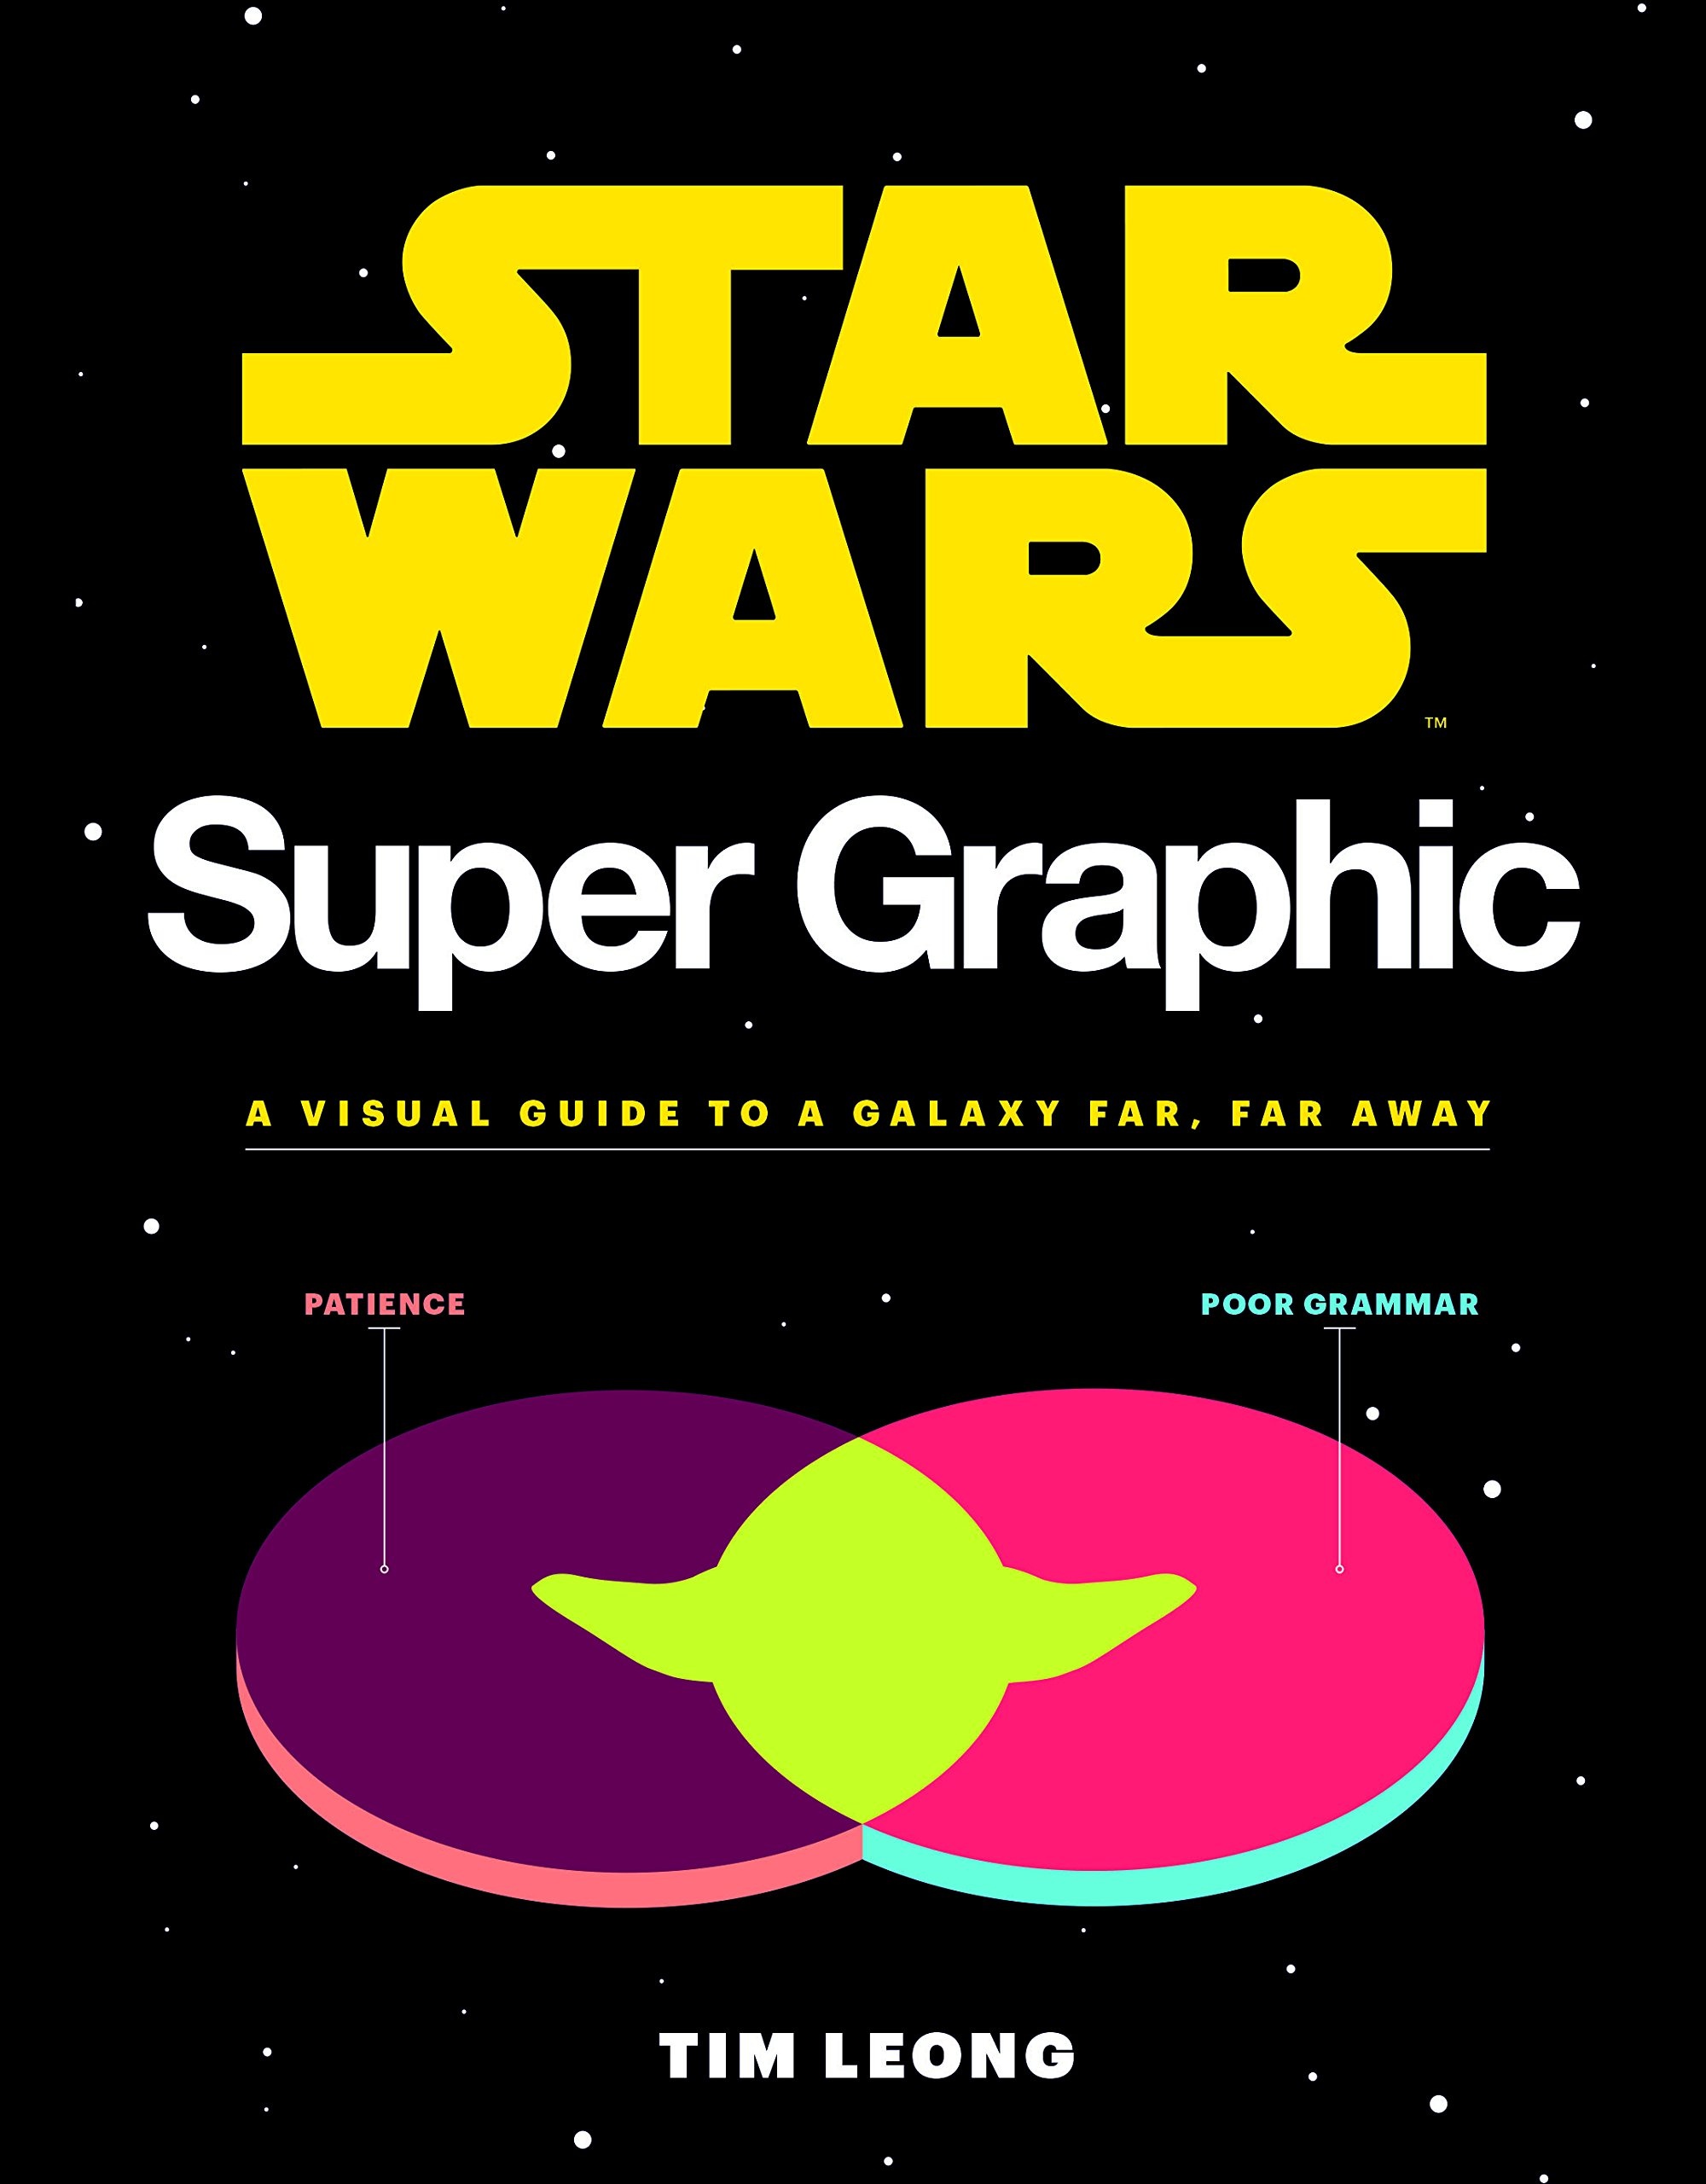 Star Wars Super Graphic: A Visual Guide to a Galaxy Far, Far Away (Star Wars Book, Movie Accompaniment, Book about Movies) (Star Wars x Chronicle Books)